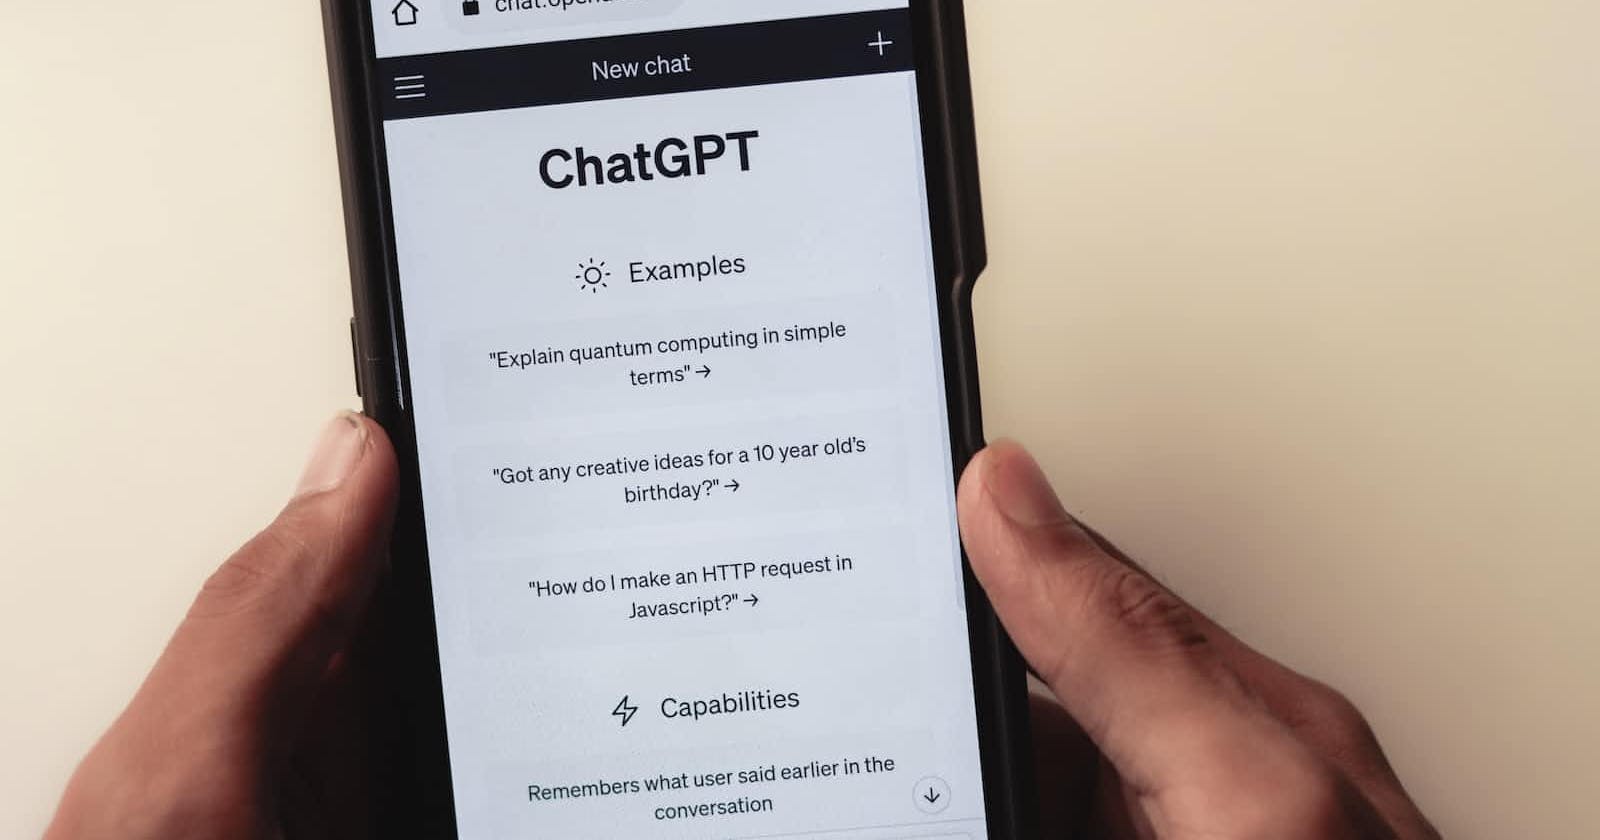 "Meet ChatGPT: Your Personal AI Language Model"